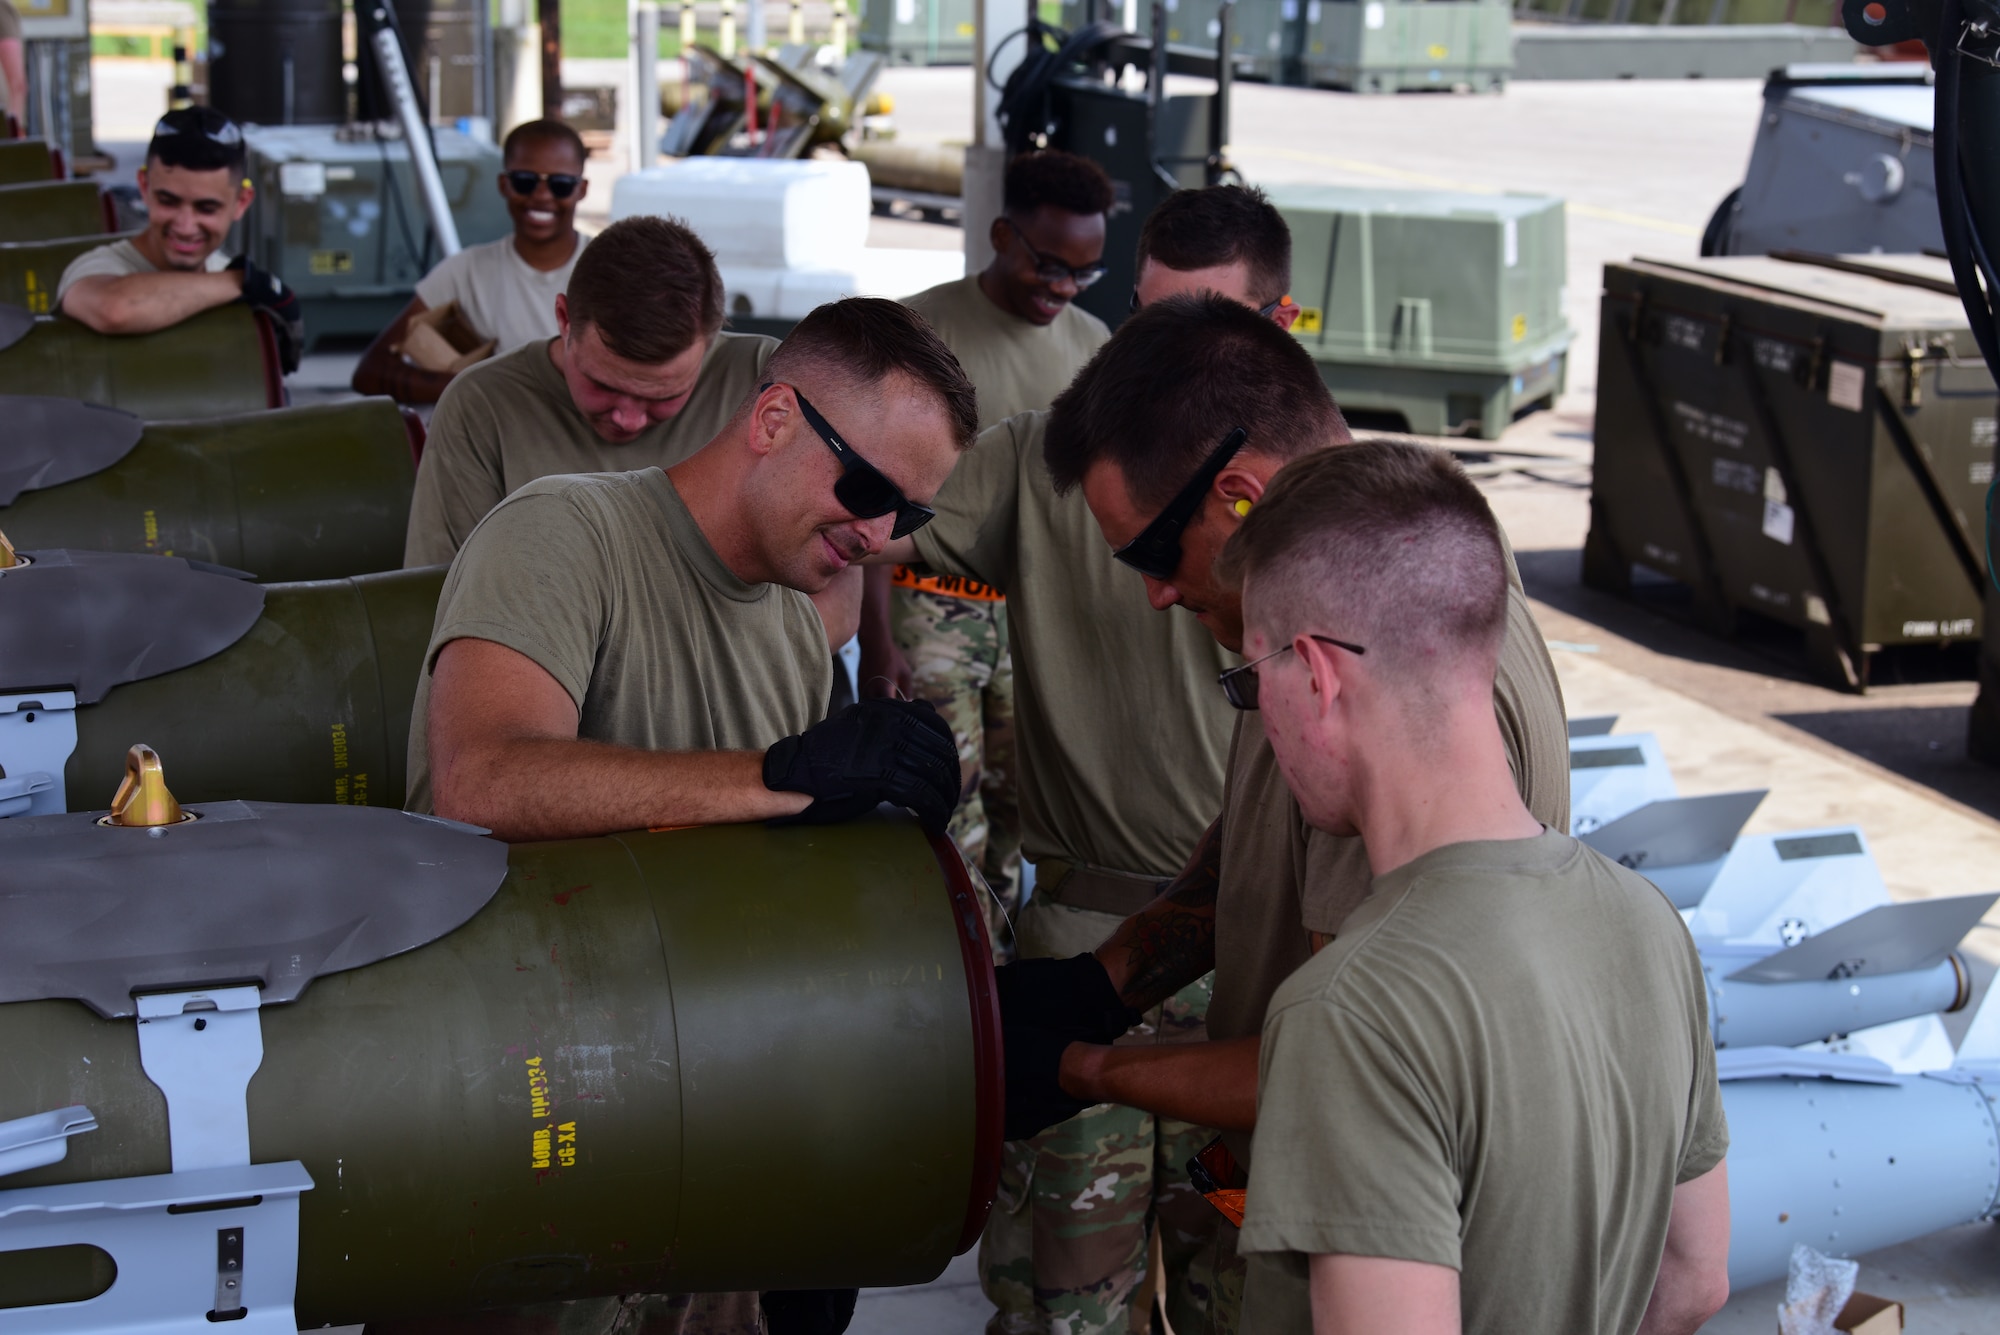 Airmen work to build munitions during CAPEX 2019 Aug. 6, 2019, at Aviano Air Base, Italy. Airmen are able to learn and enhance their skills during exercises allowing for improved combat readiness. (U.S. Air Force photo by Airman 1st Class Caleb House)